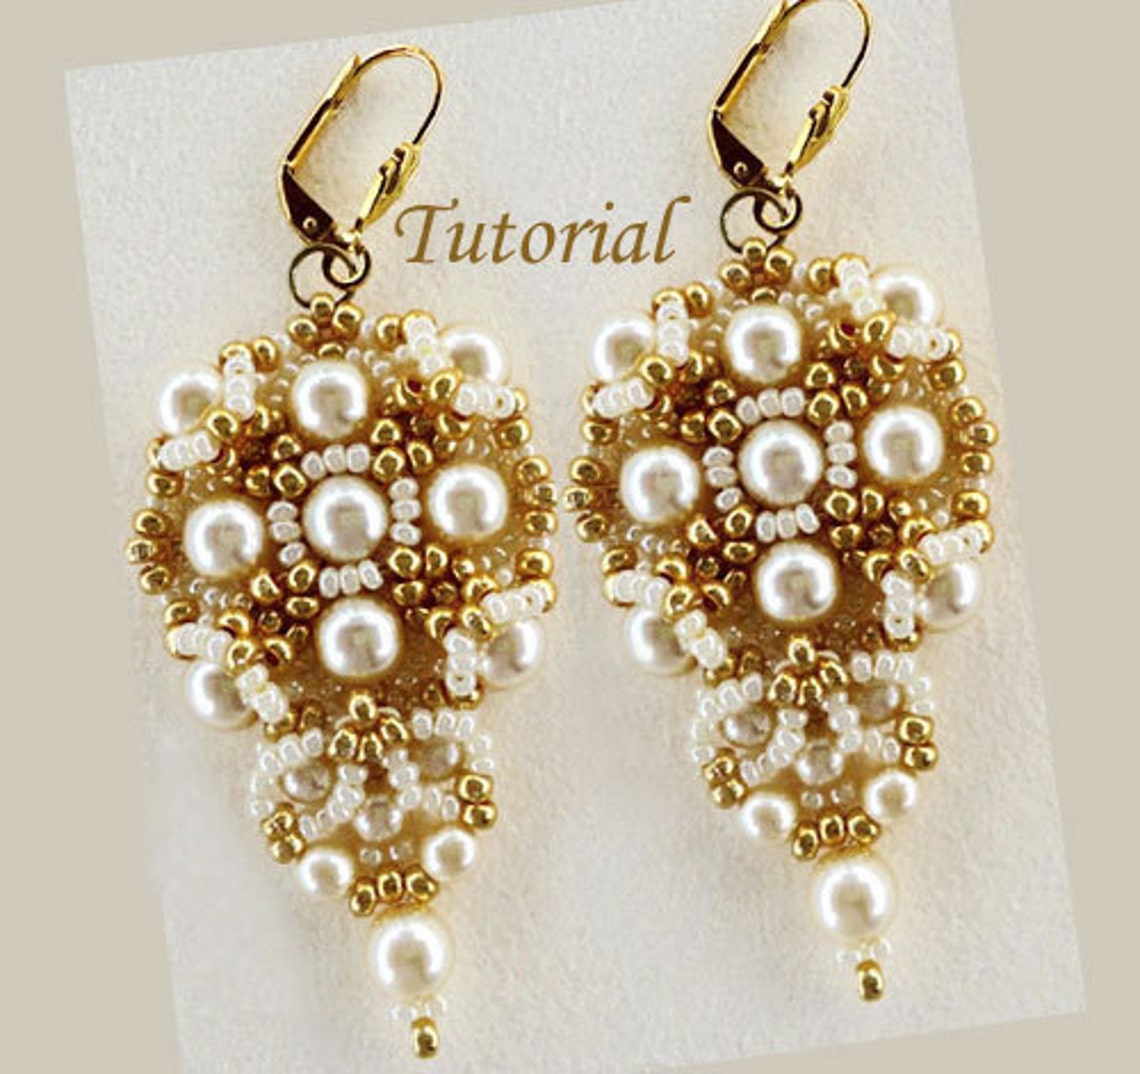 Tutorial Gold and Ivory Earrings Bead Pattern PDF - Etsy